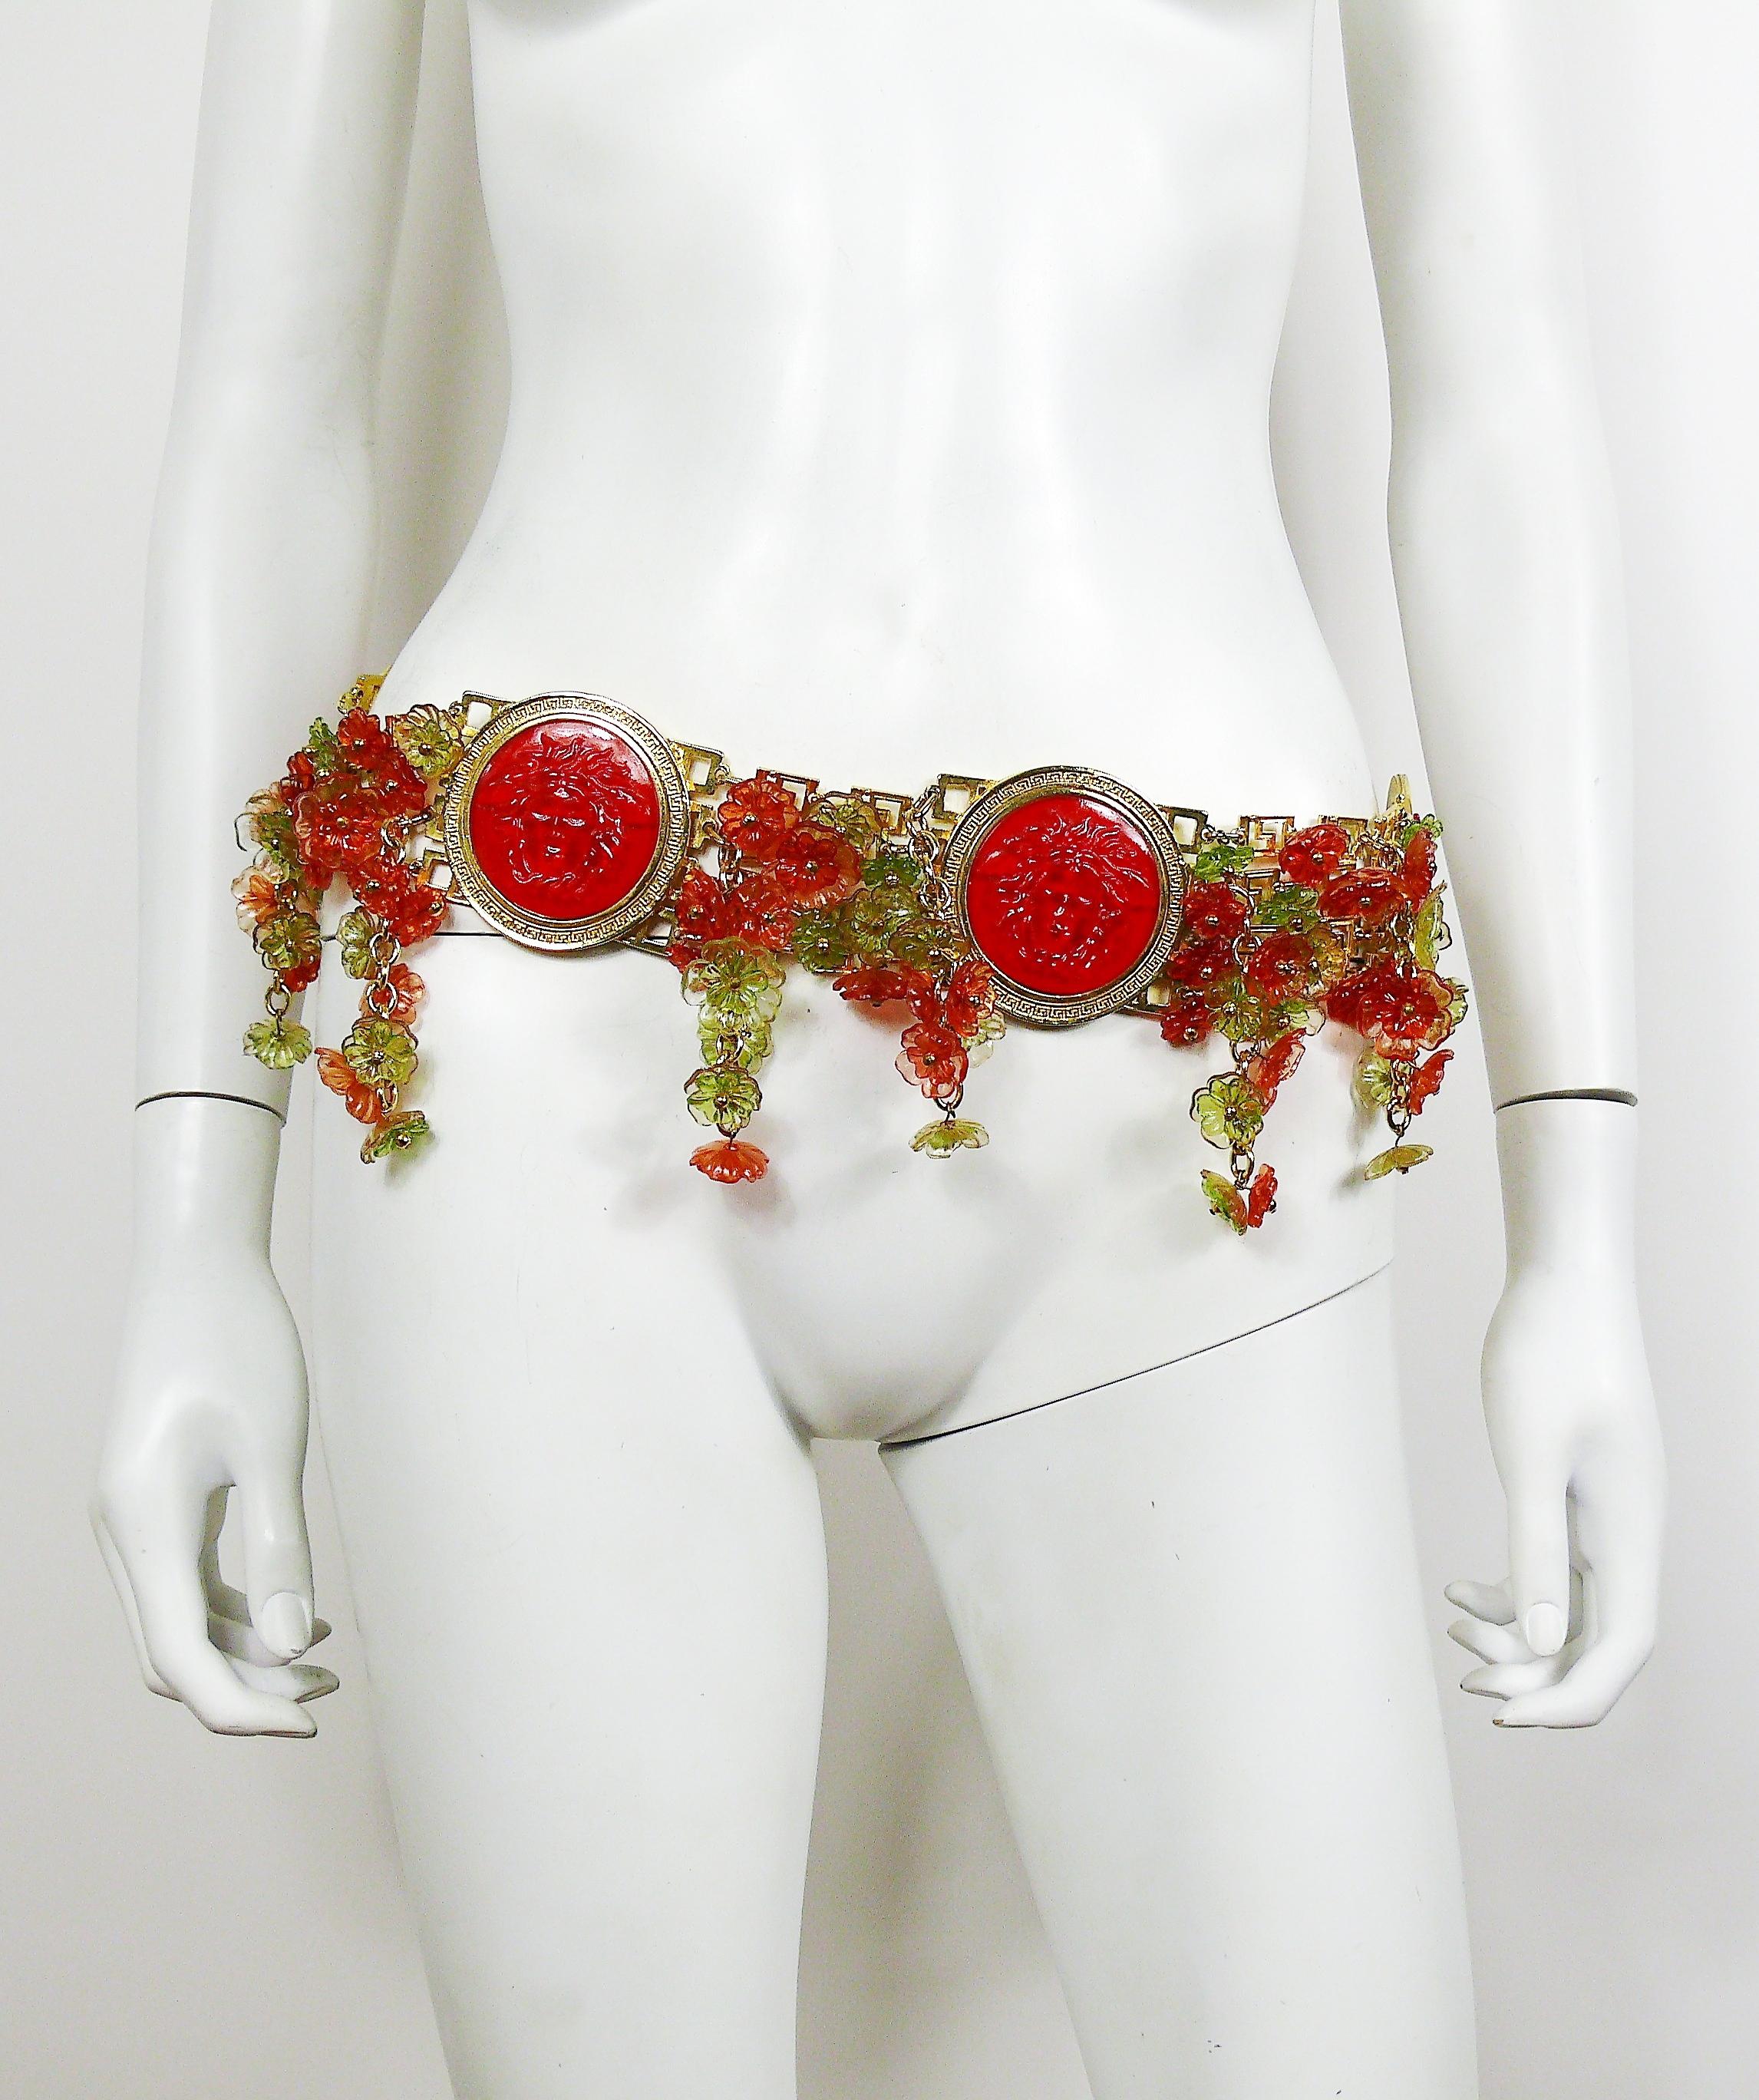 GIANNI VERSACE iconic quadruple gold toned greca motif belt featuring massive red resin Medusa head medallions and multicolored resin flowers embellishement.

1993 Spring/Summer Collection.
Similar belt (in black version) worn by super model YASMEEN